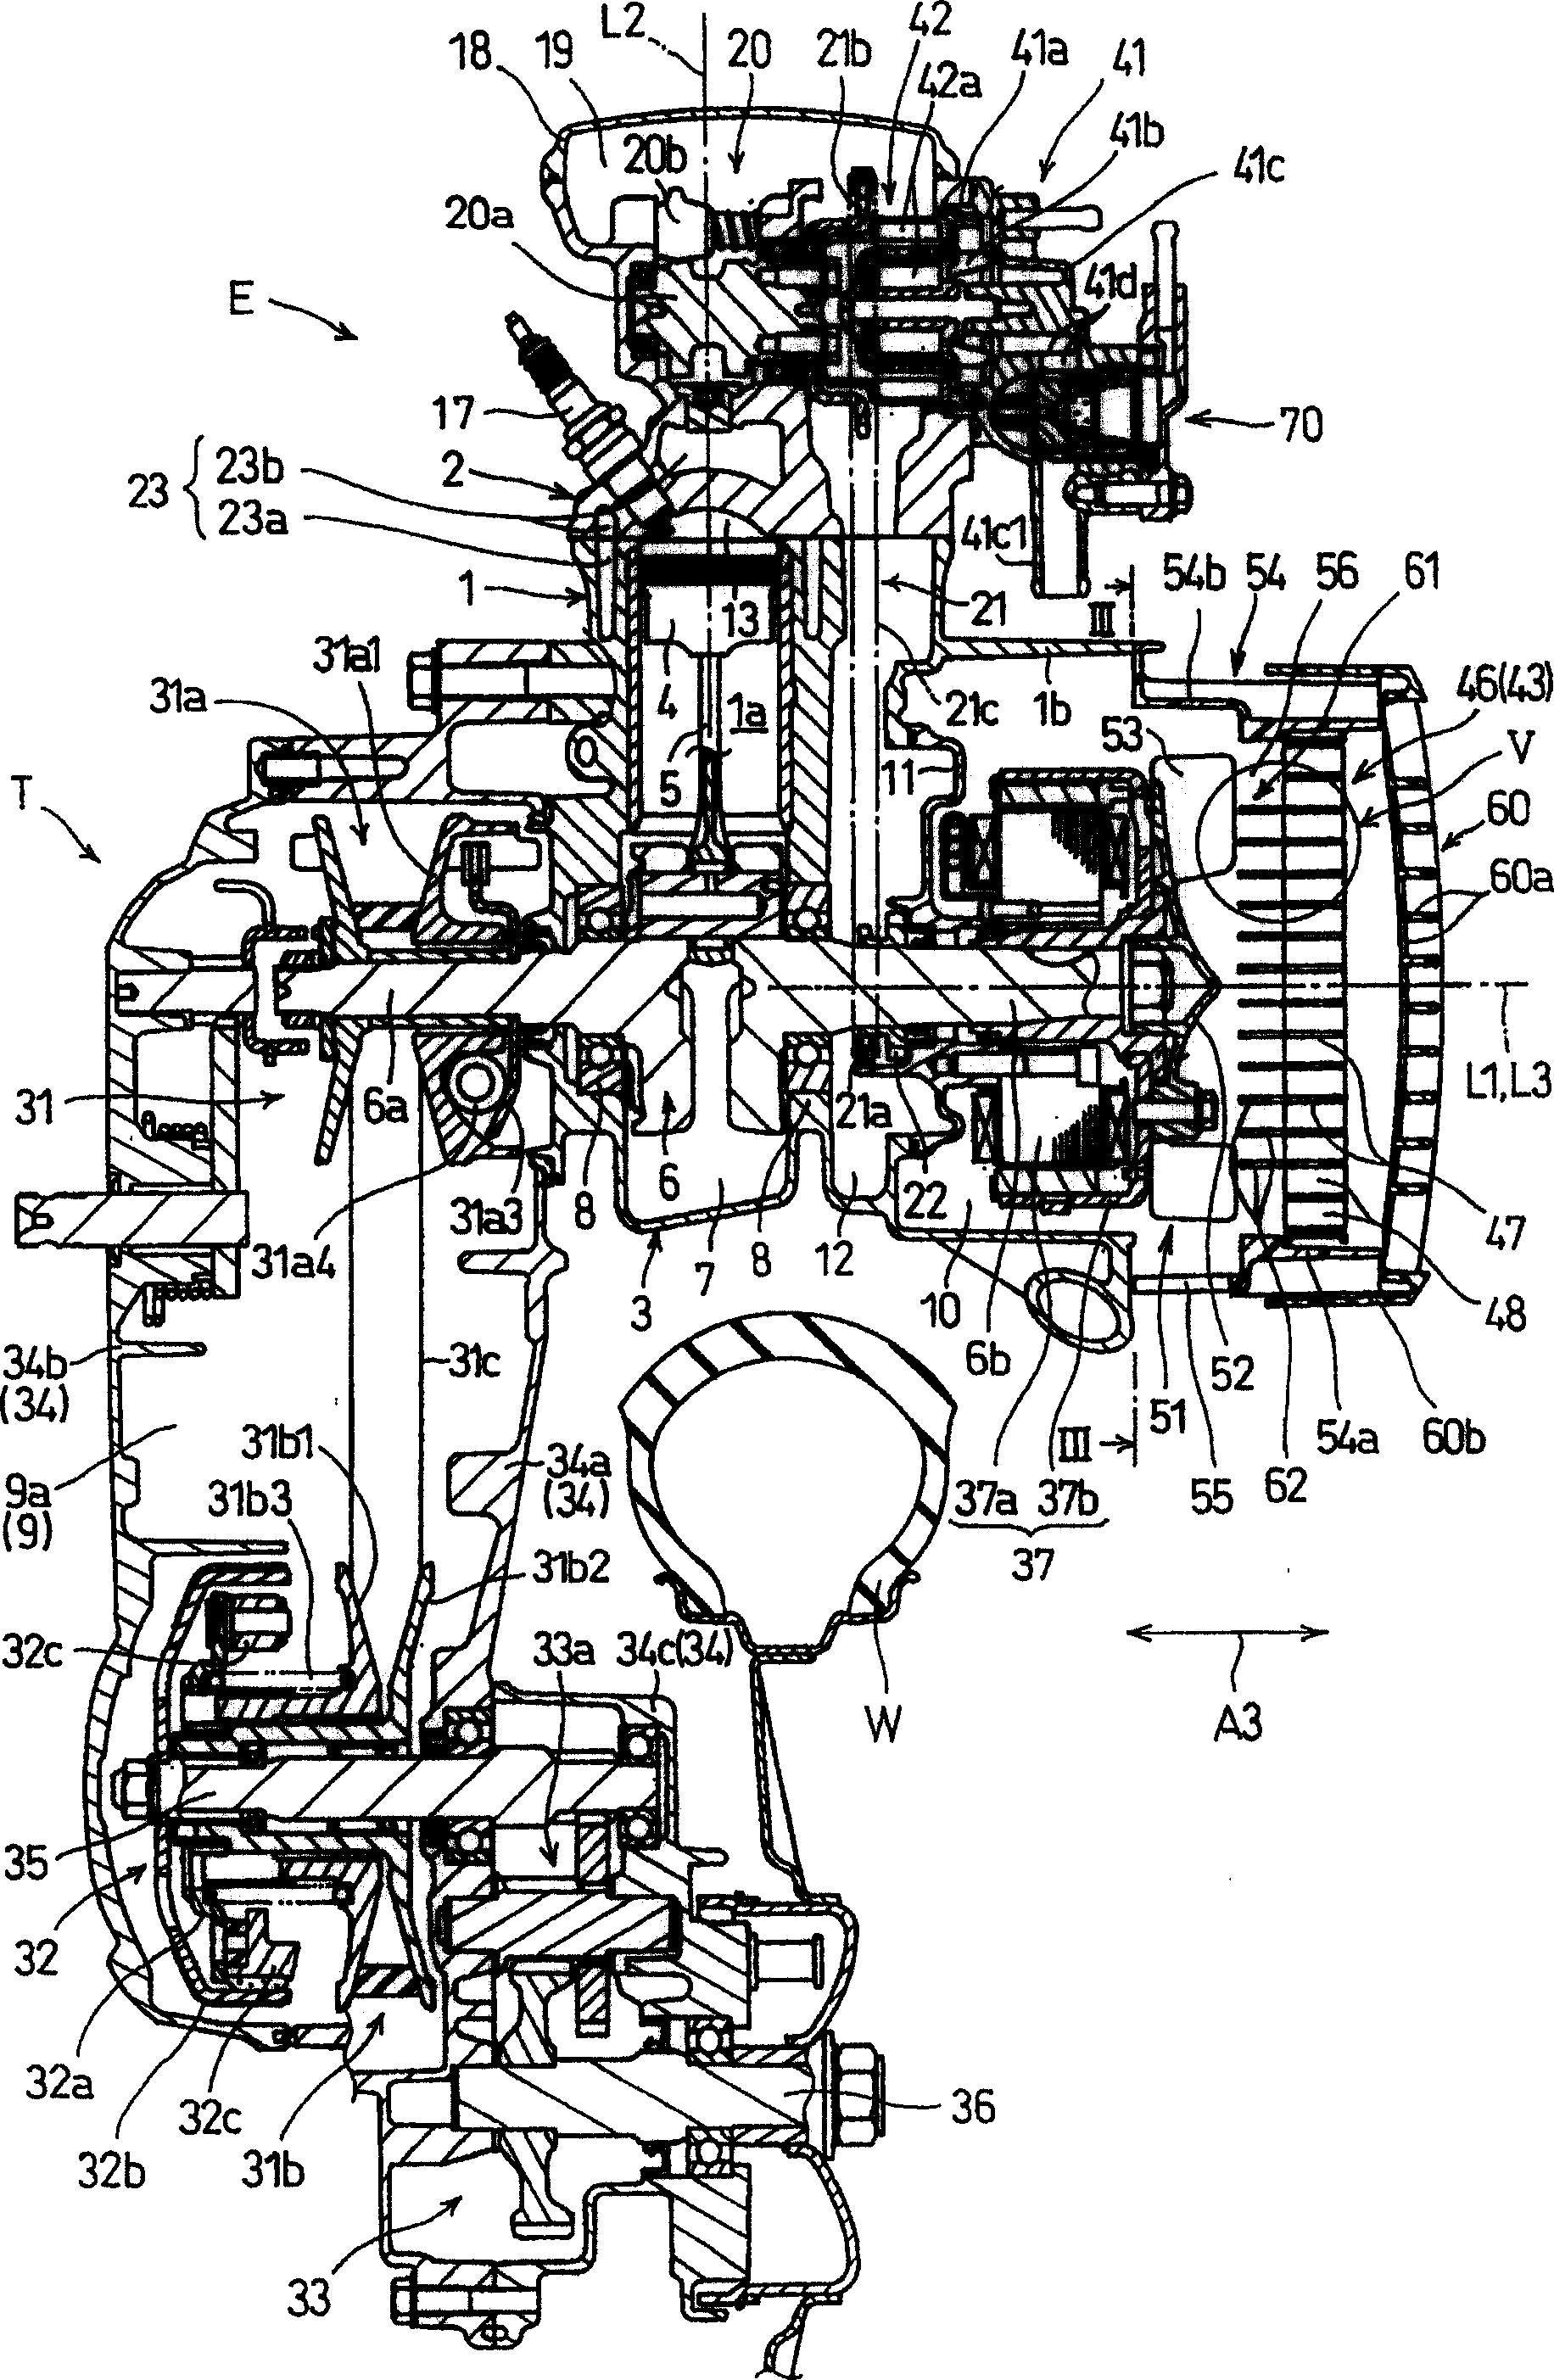 Cooling device with cooling fan